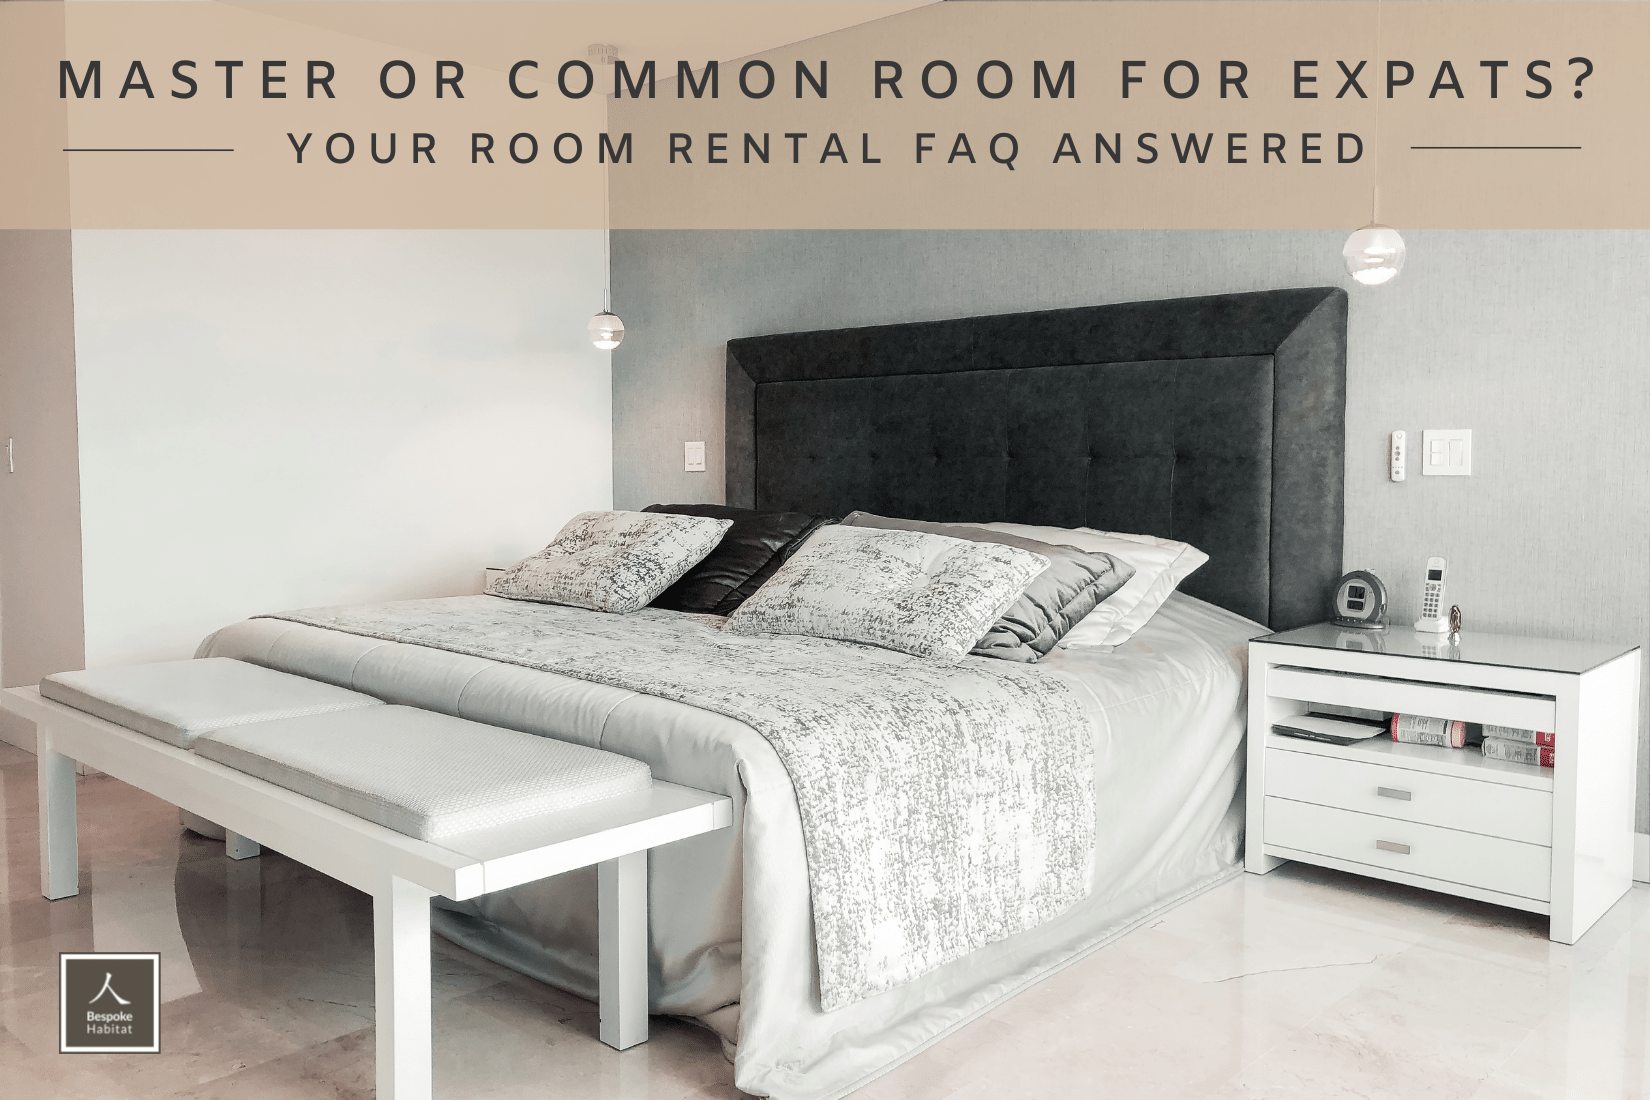 Master or Common Room for Expats Room Rental FAQ